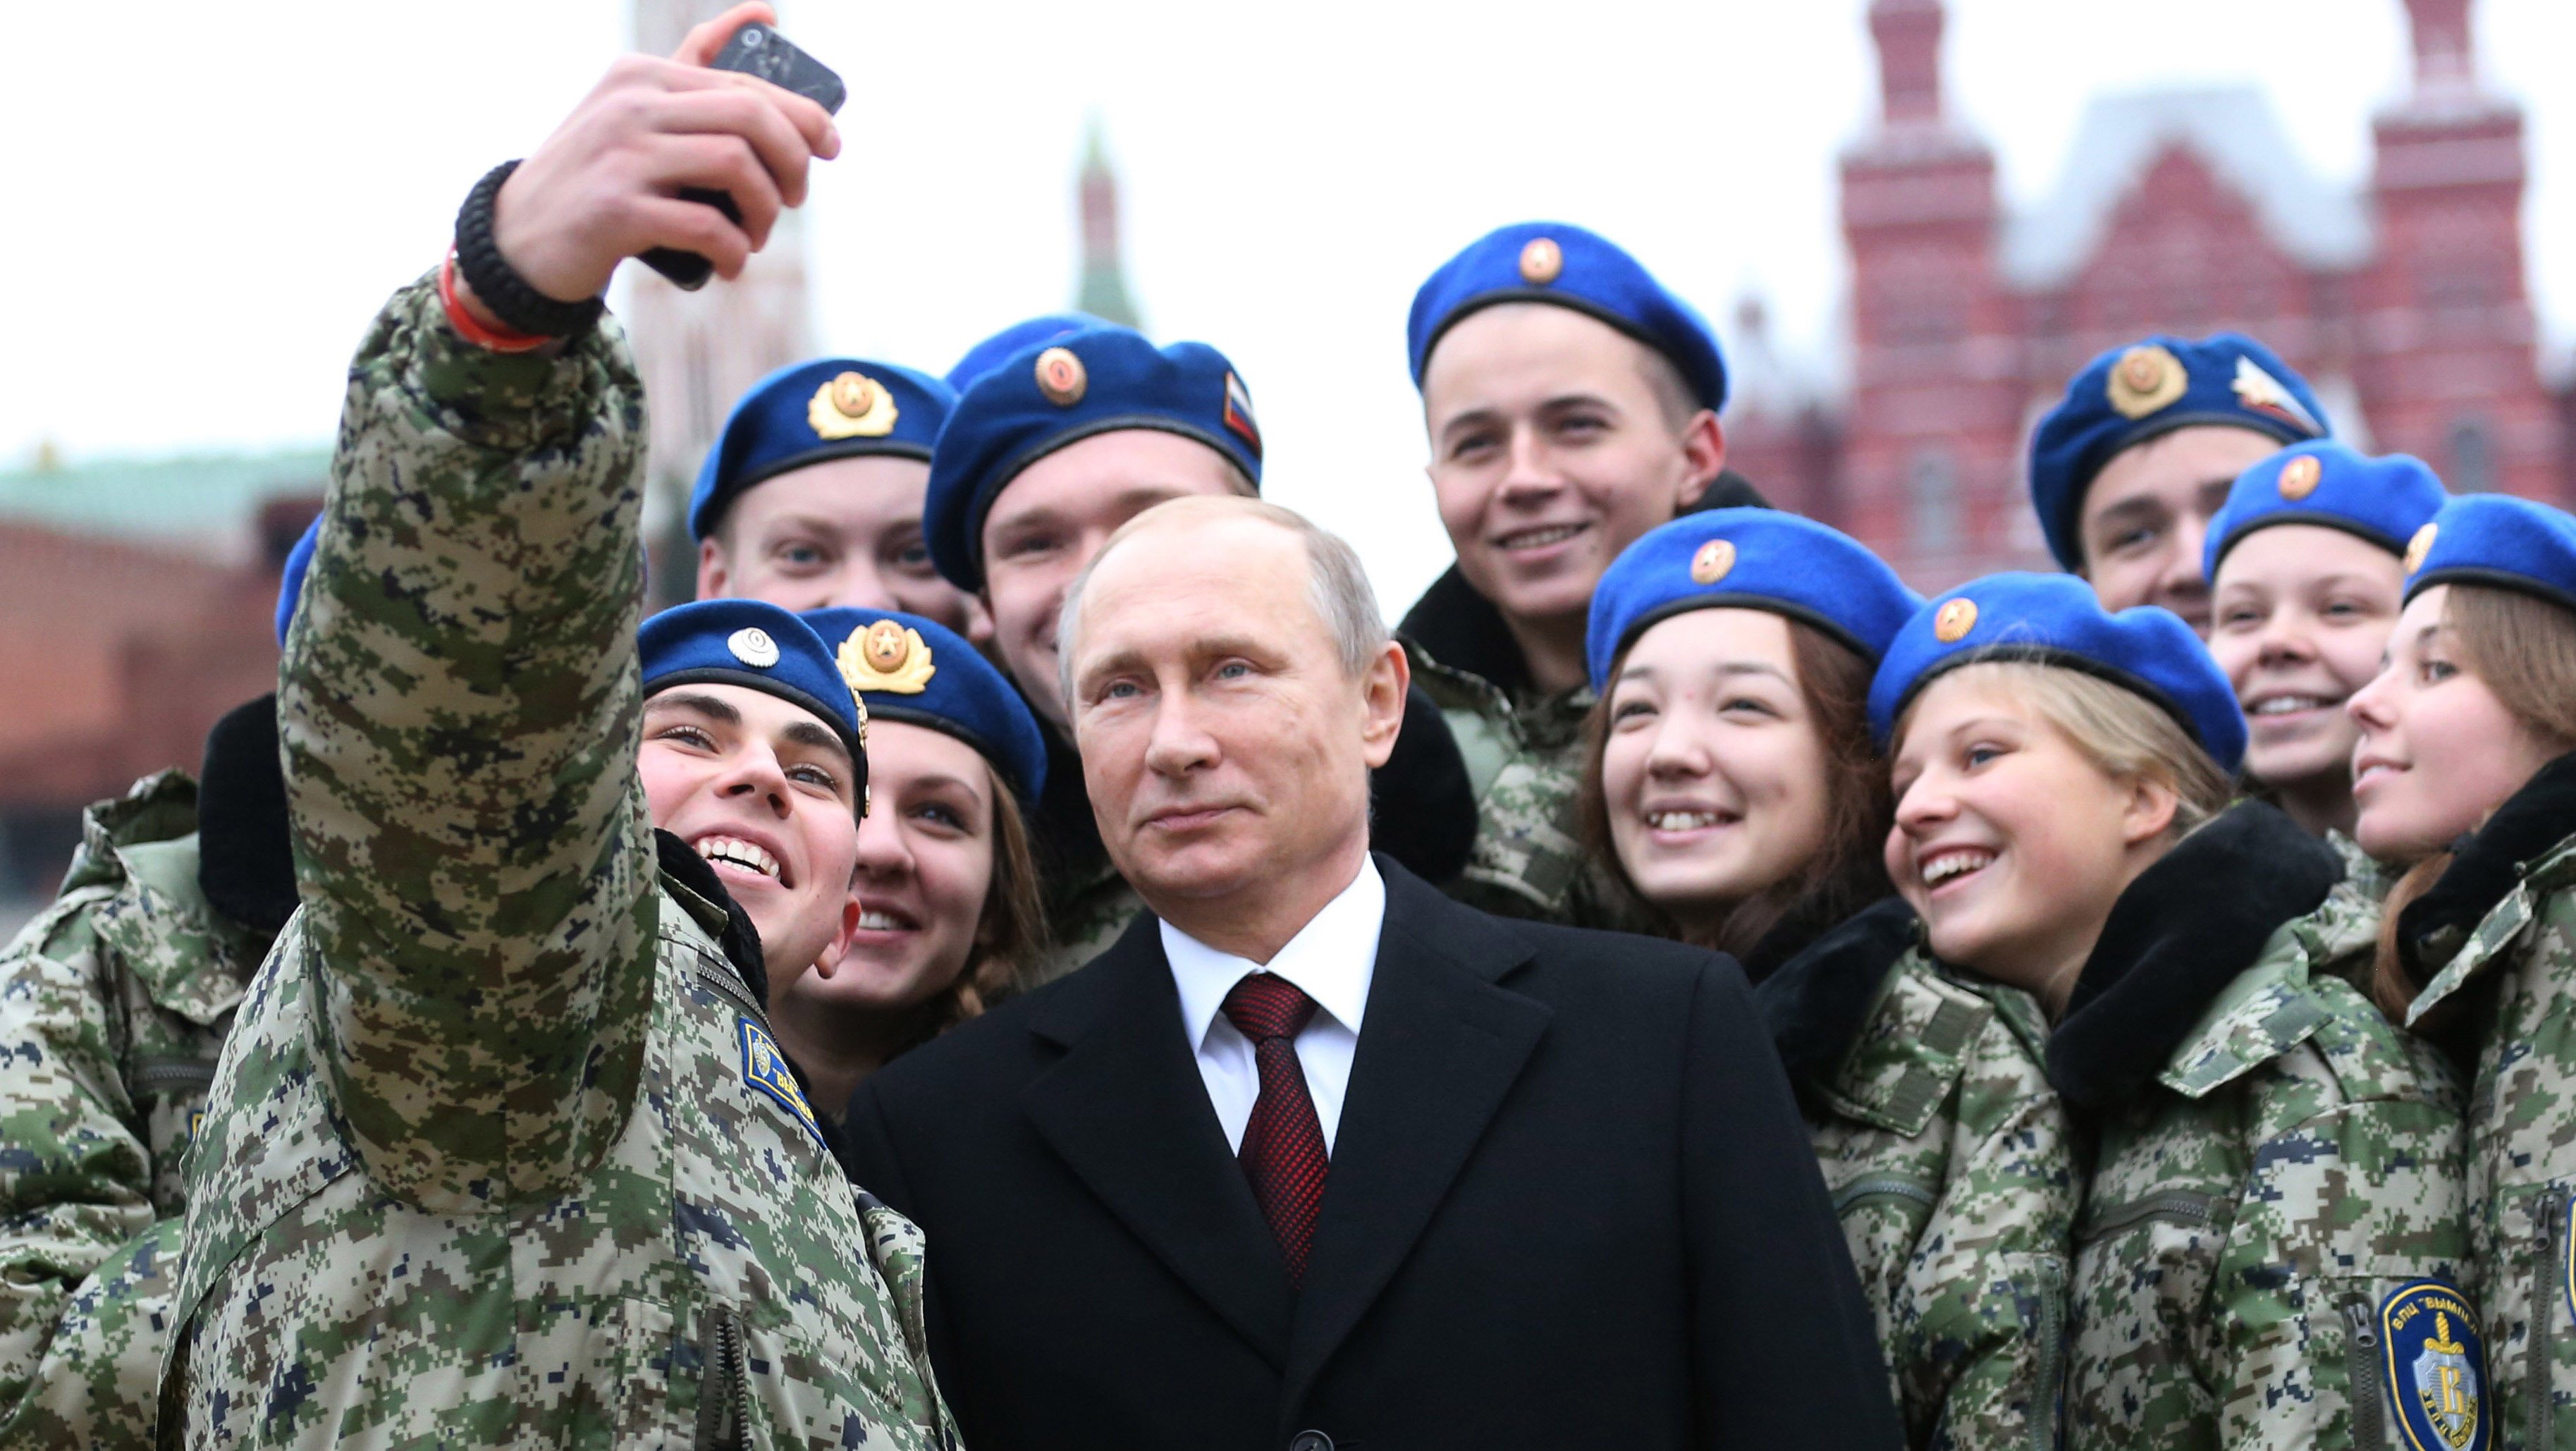 Vladimir Putin Attends National Unity Day In Red Square